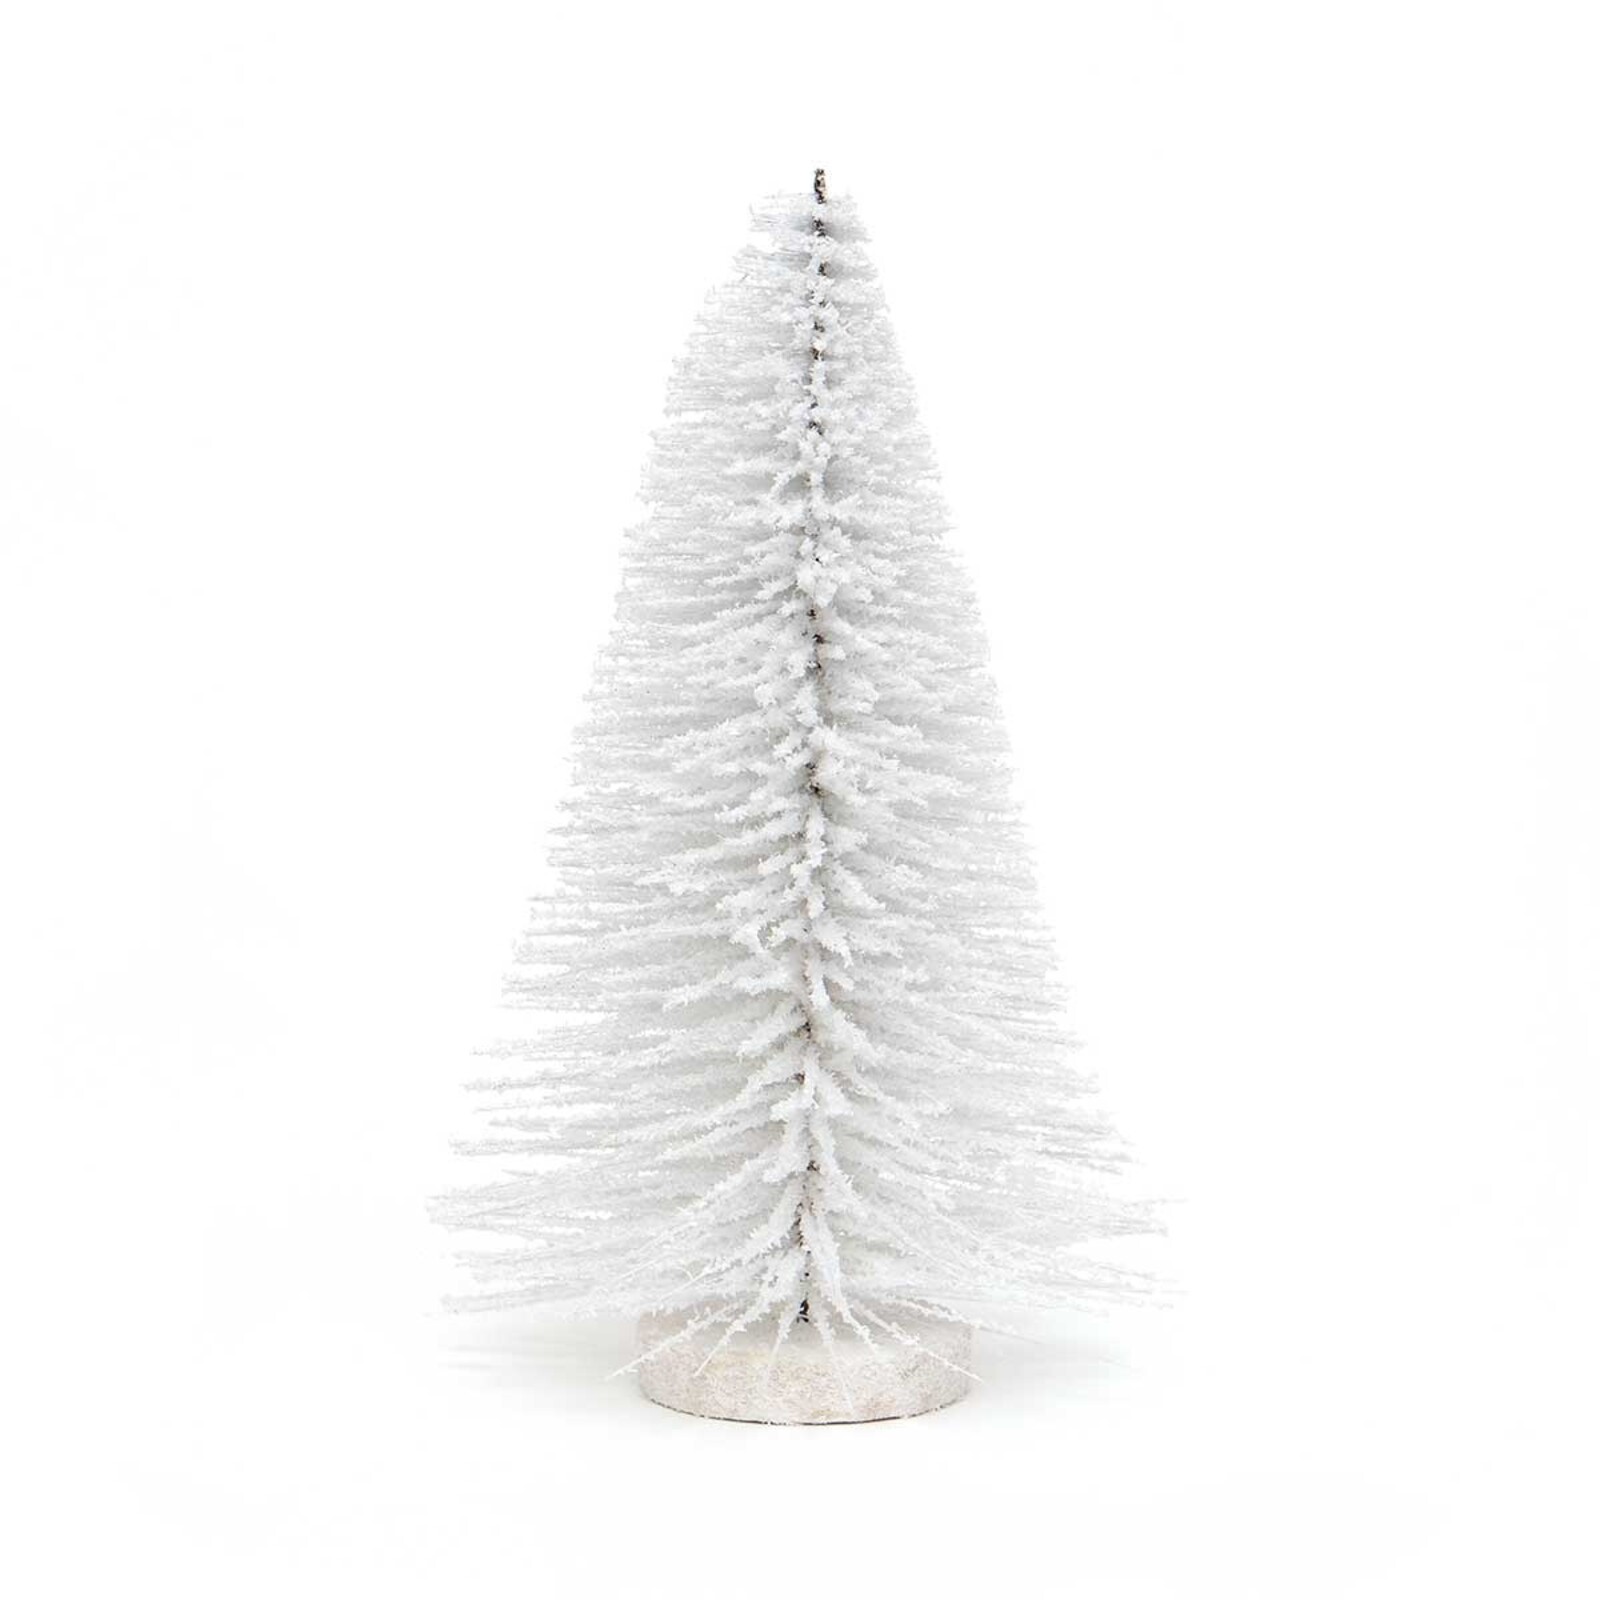 Meravic SNOWED BRISTLE TREE FLOCKED WHITE WITH GLITTER AND WOOD BASE LARGE 8"X13" R9103 loading=